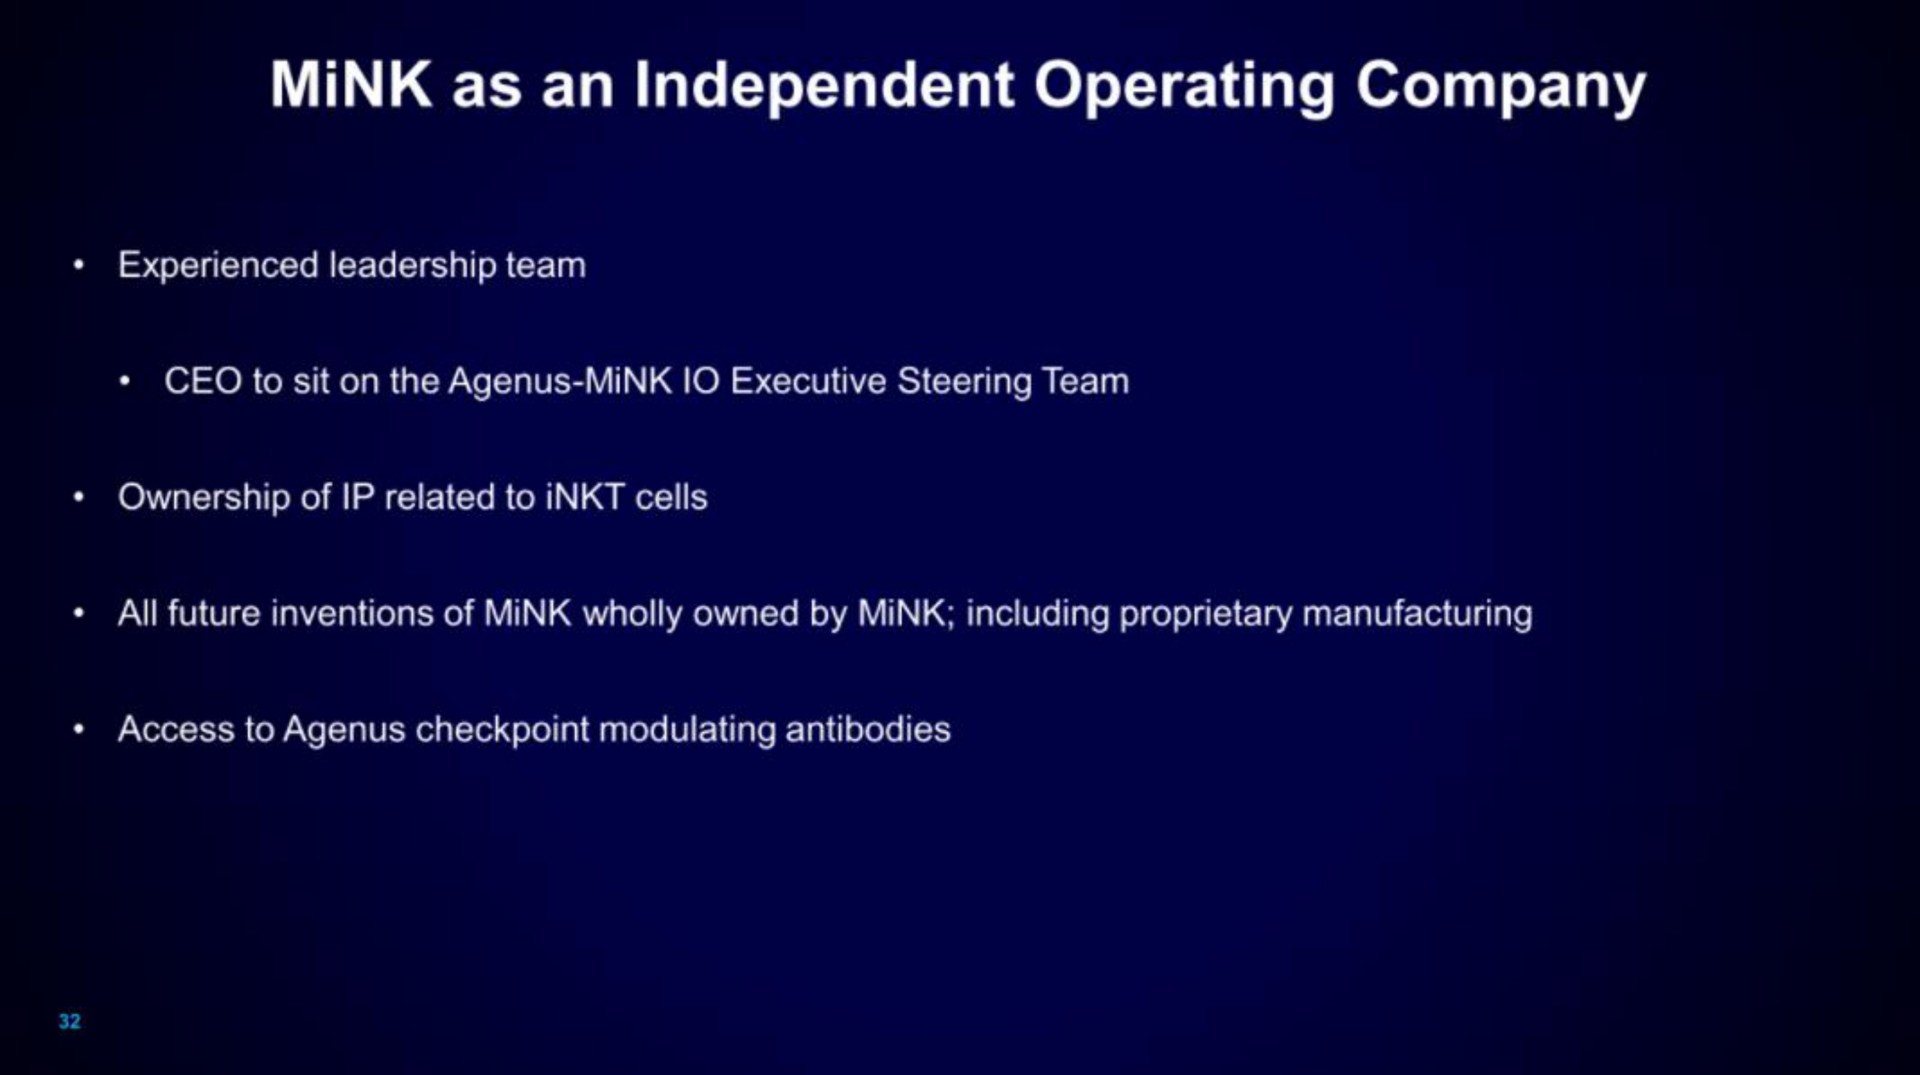 mink as an independent operating company | Mink Therapeutics